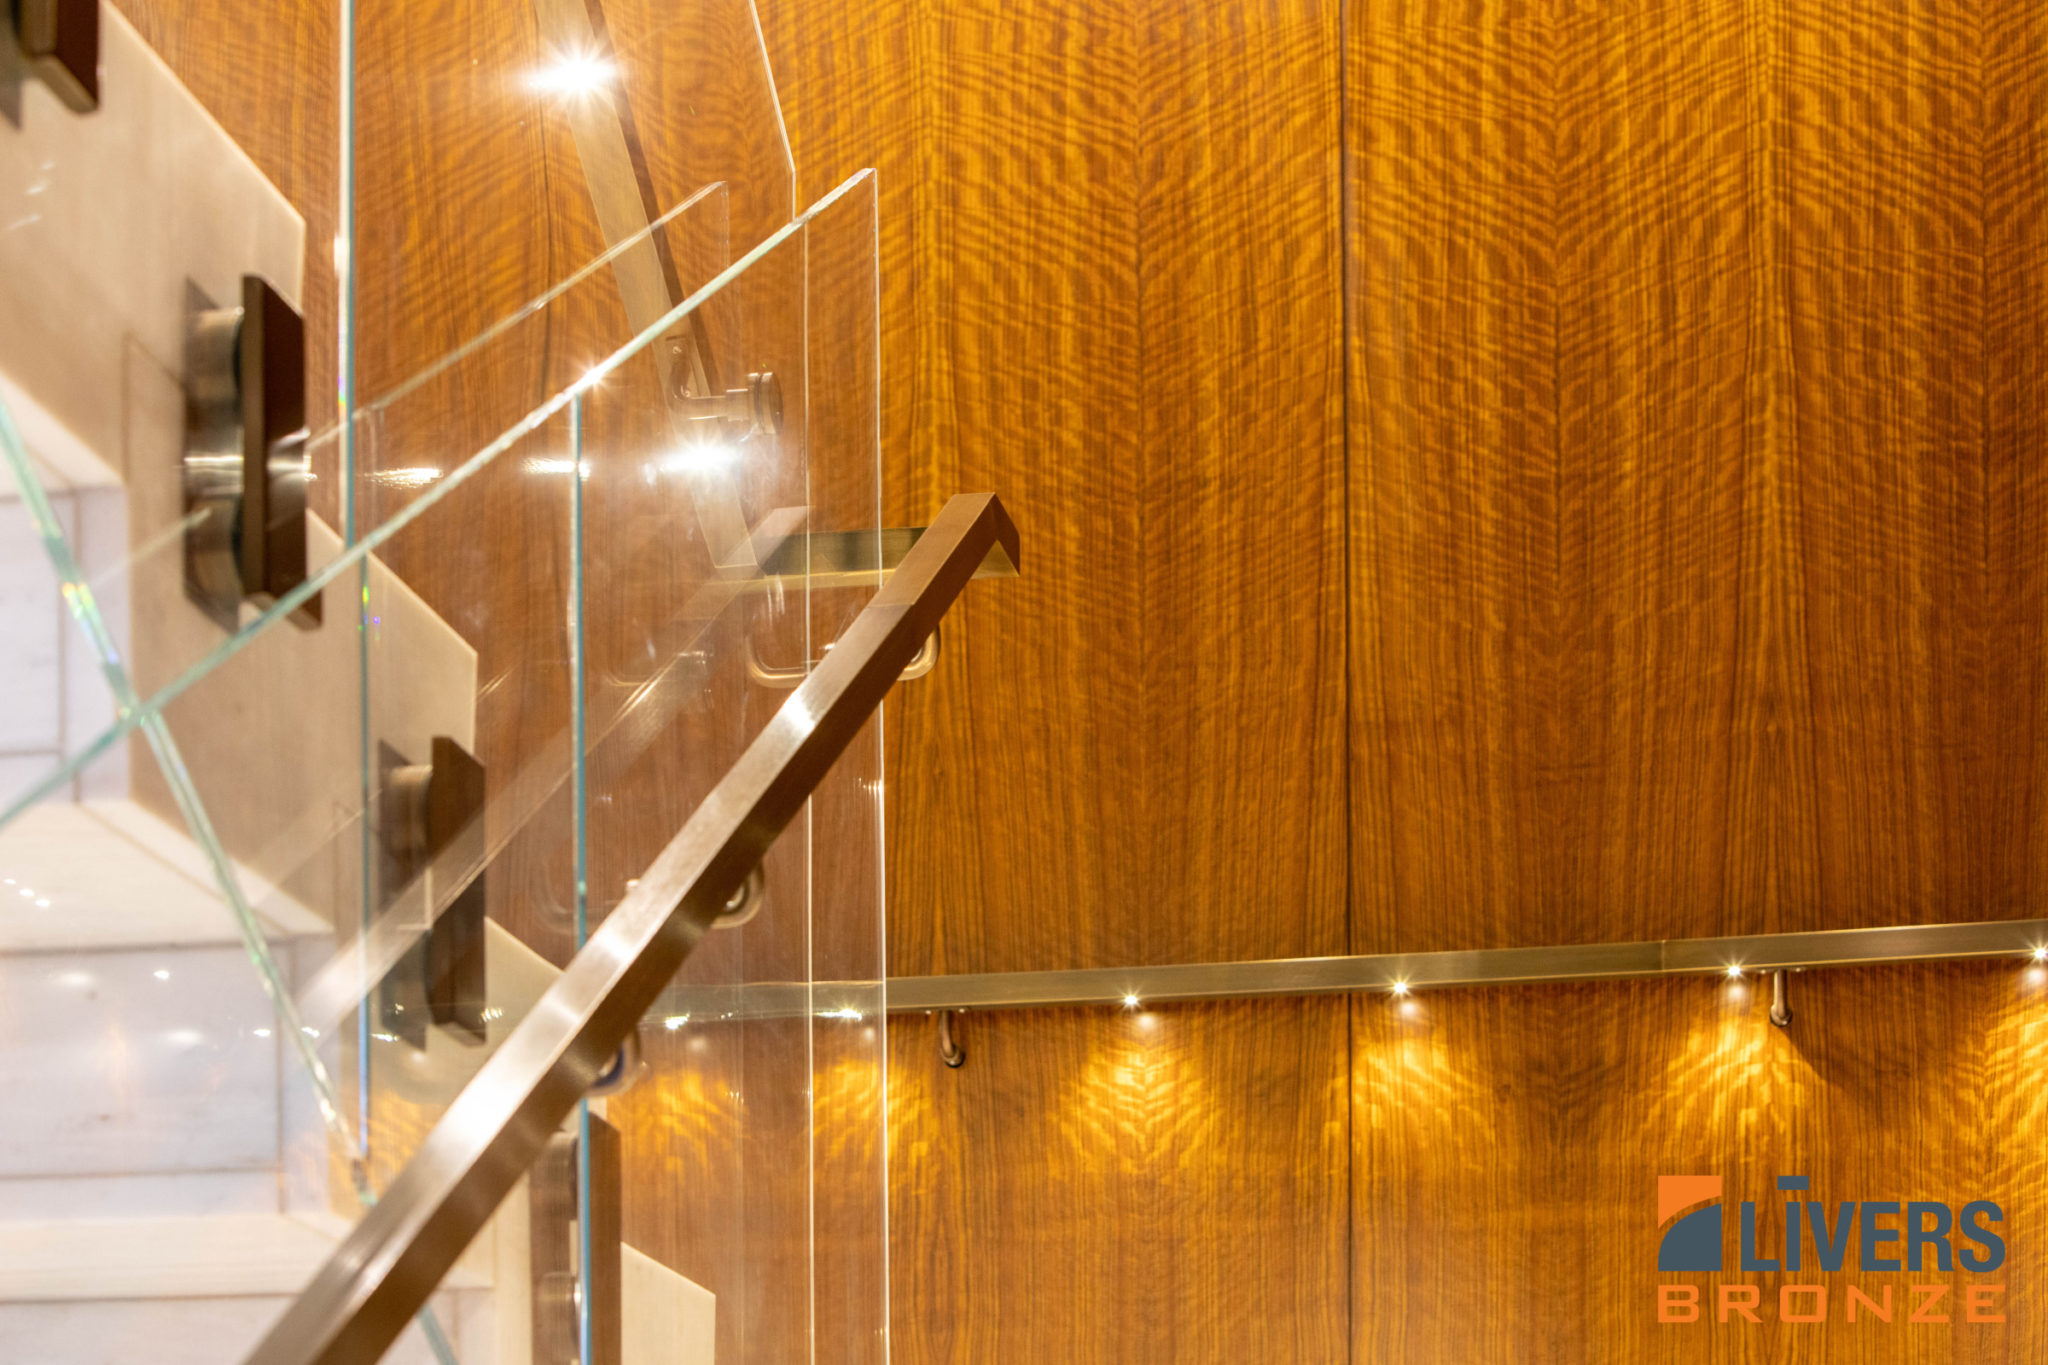 Livers Bronze Blok Commercial Glass Railing installed in the lobby of the Trammell Crow Center in downtown Dallas Texas and is made in the USA